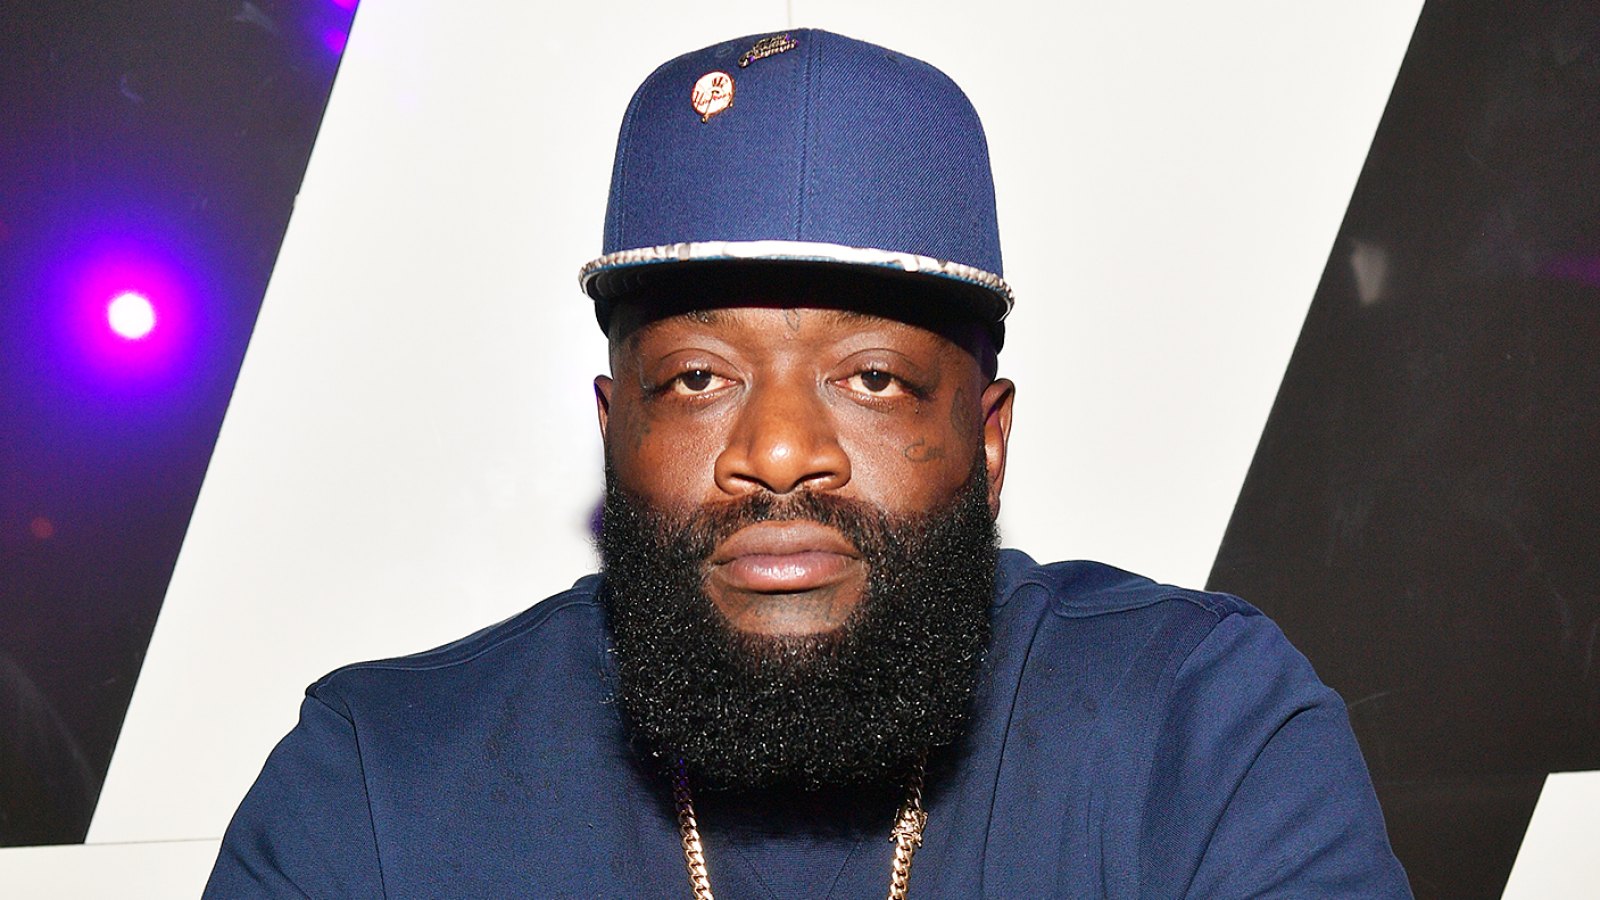 Rick Ross Updates Fans With Photo After Hospitalization